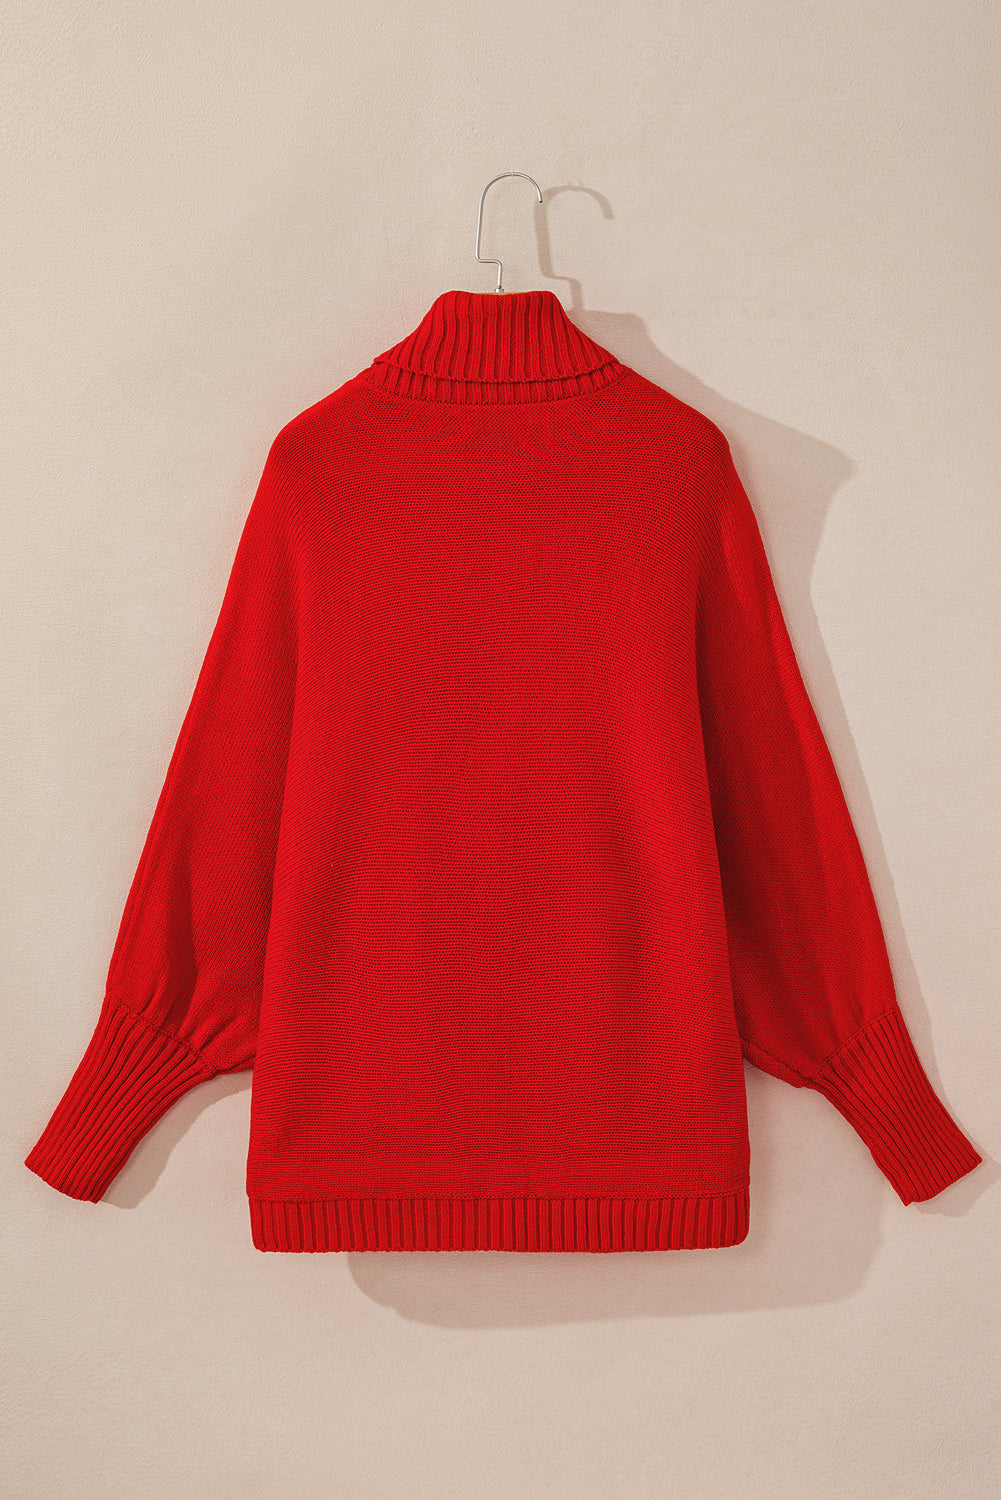 Racing Red Valentine LOVE Letter Embroidered High Neck Sweater